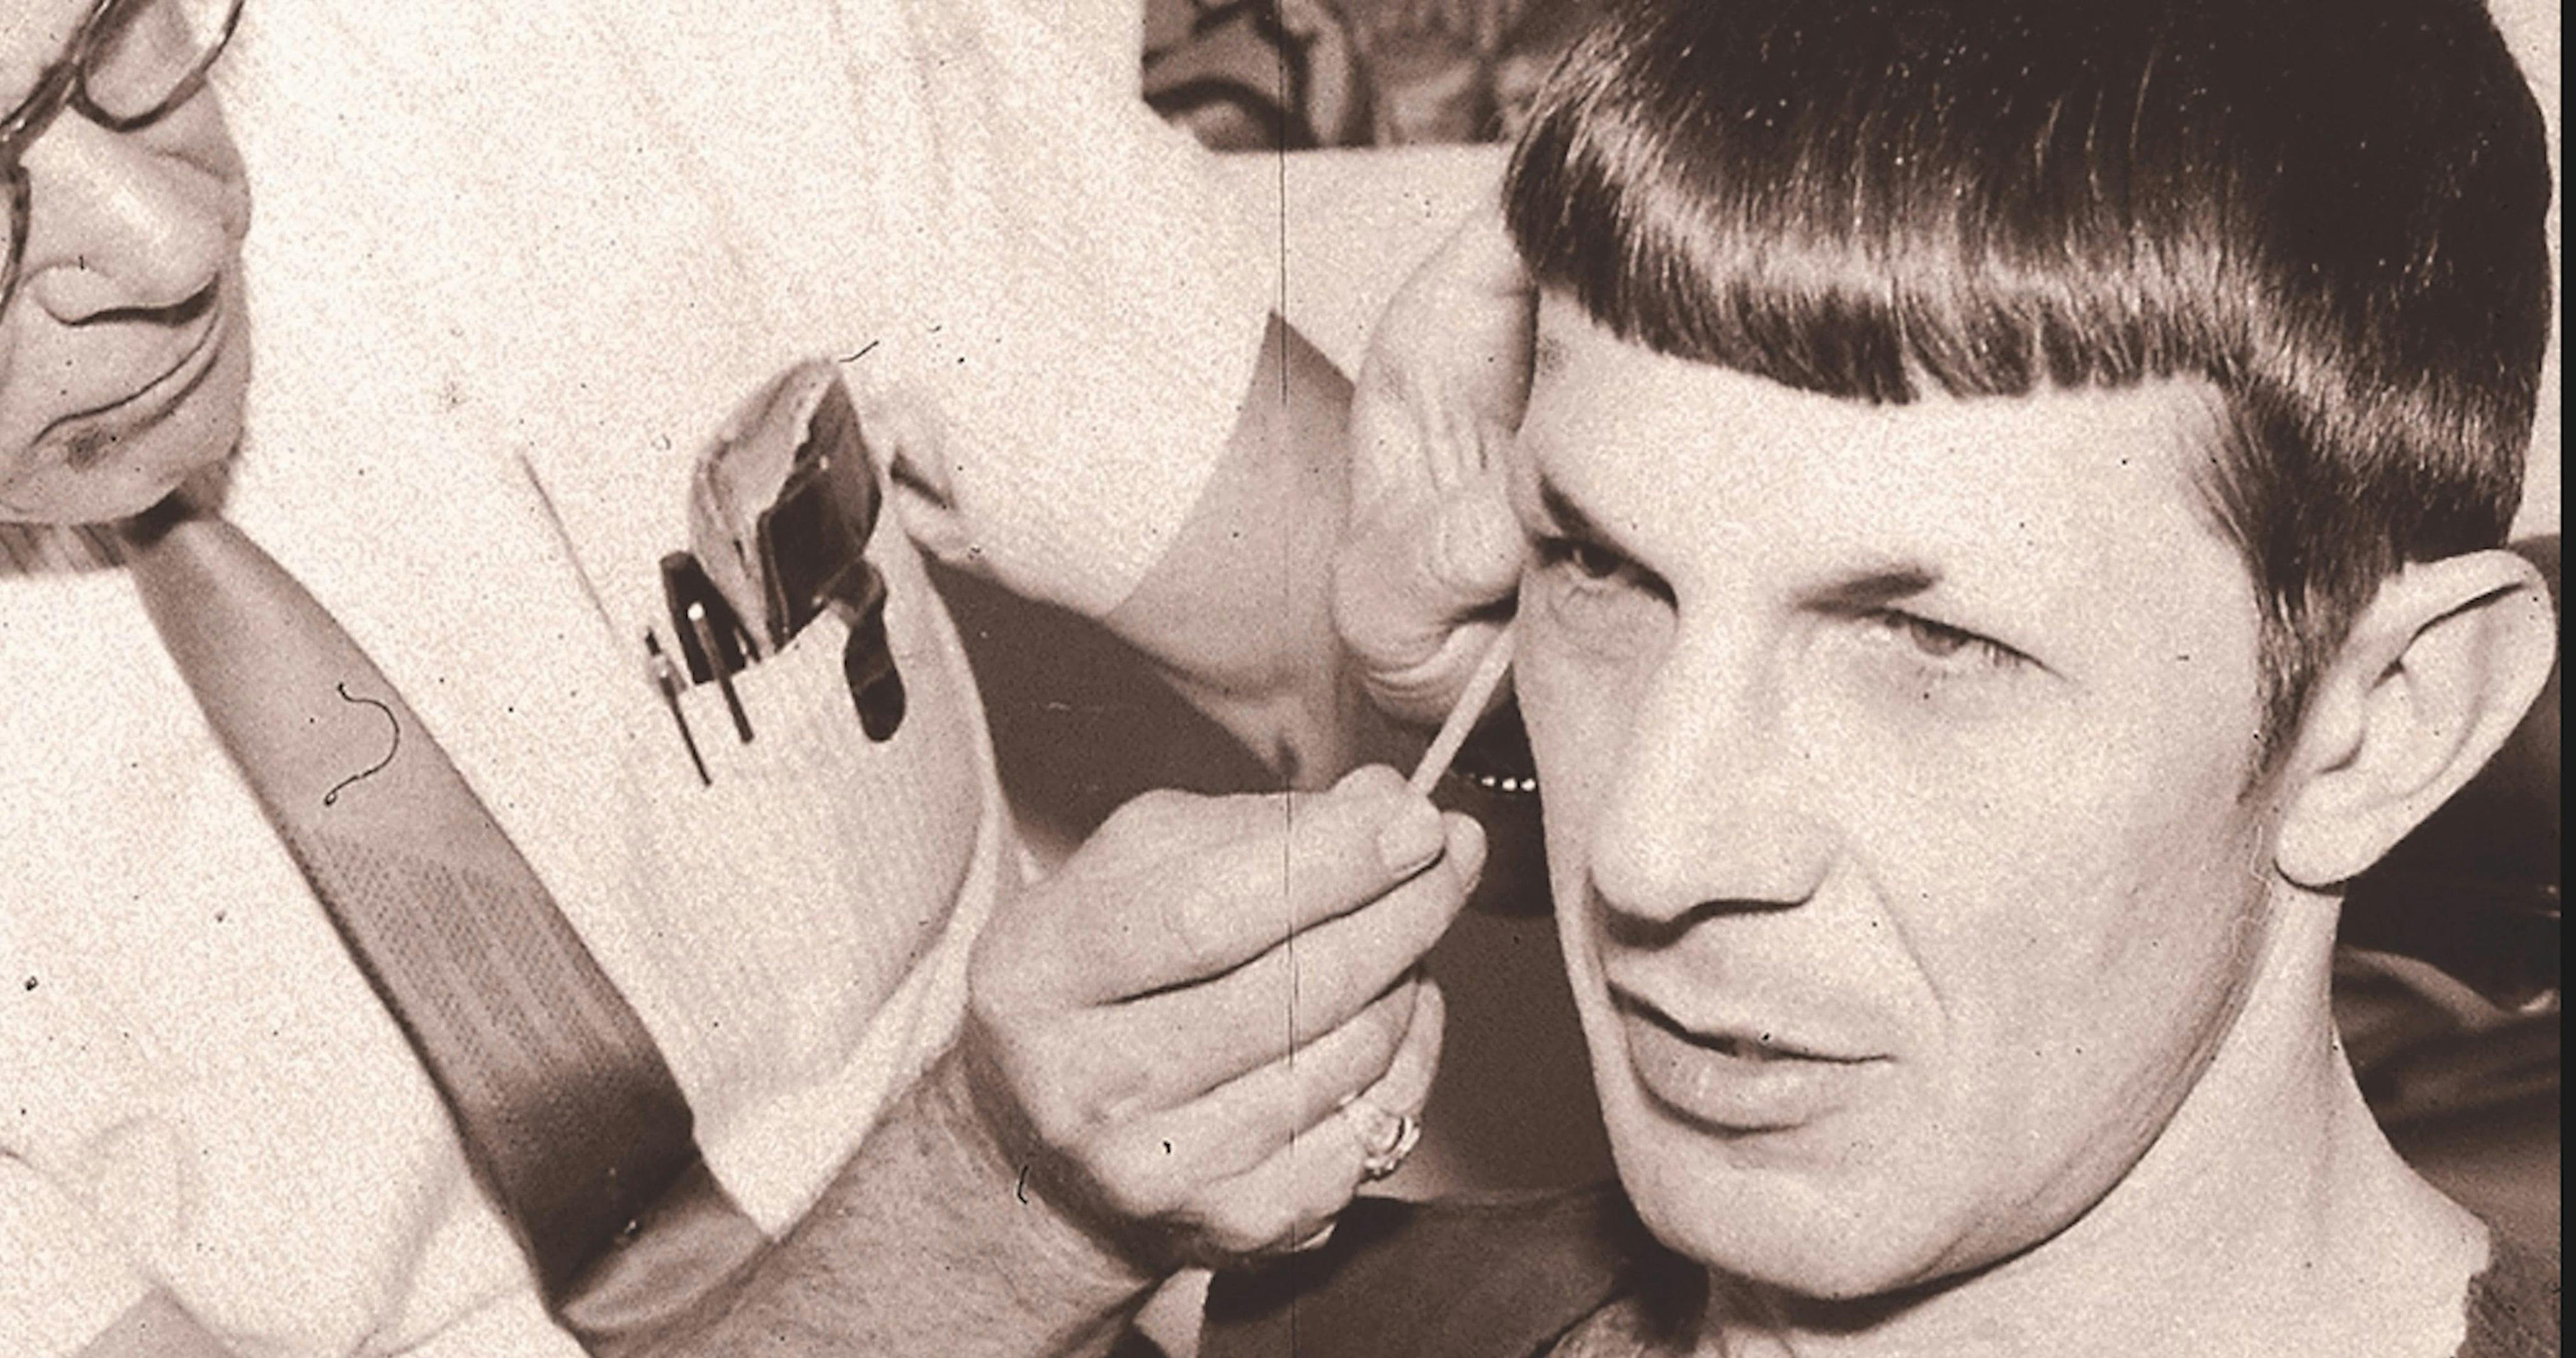 Leonard Nimoy's ears being applied during the production of Star Trek: The Original Series.